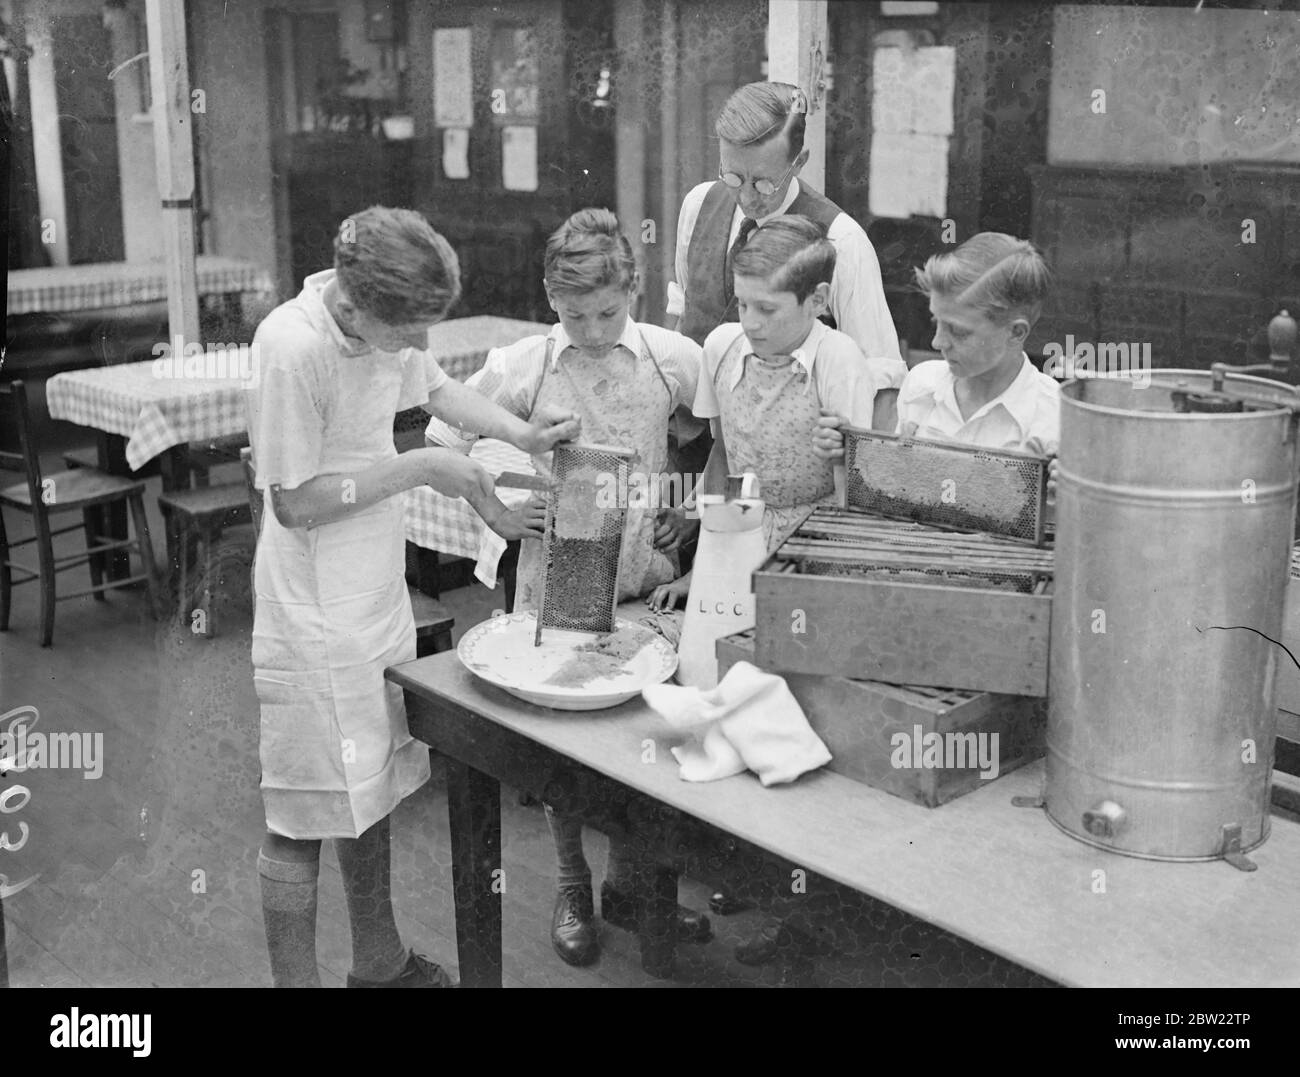 Pupils of which Lane open-air school placing the honeycomb in a kind of churn which removes the honey by centrifugal force. Beekeeping is now included in the curriculum of the wood Lane School in Shepherd's Bush, London. The pupils are given complete instruction in the art from gathering the nectar to the final process of bottling the honey. 5 September 1937. Stock Photo